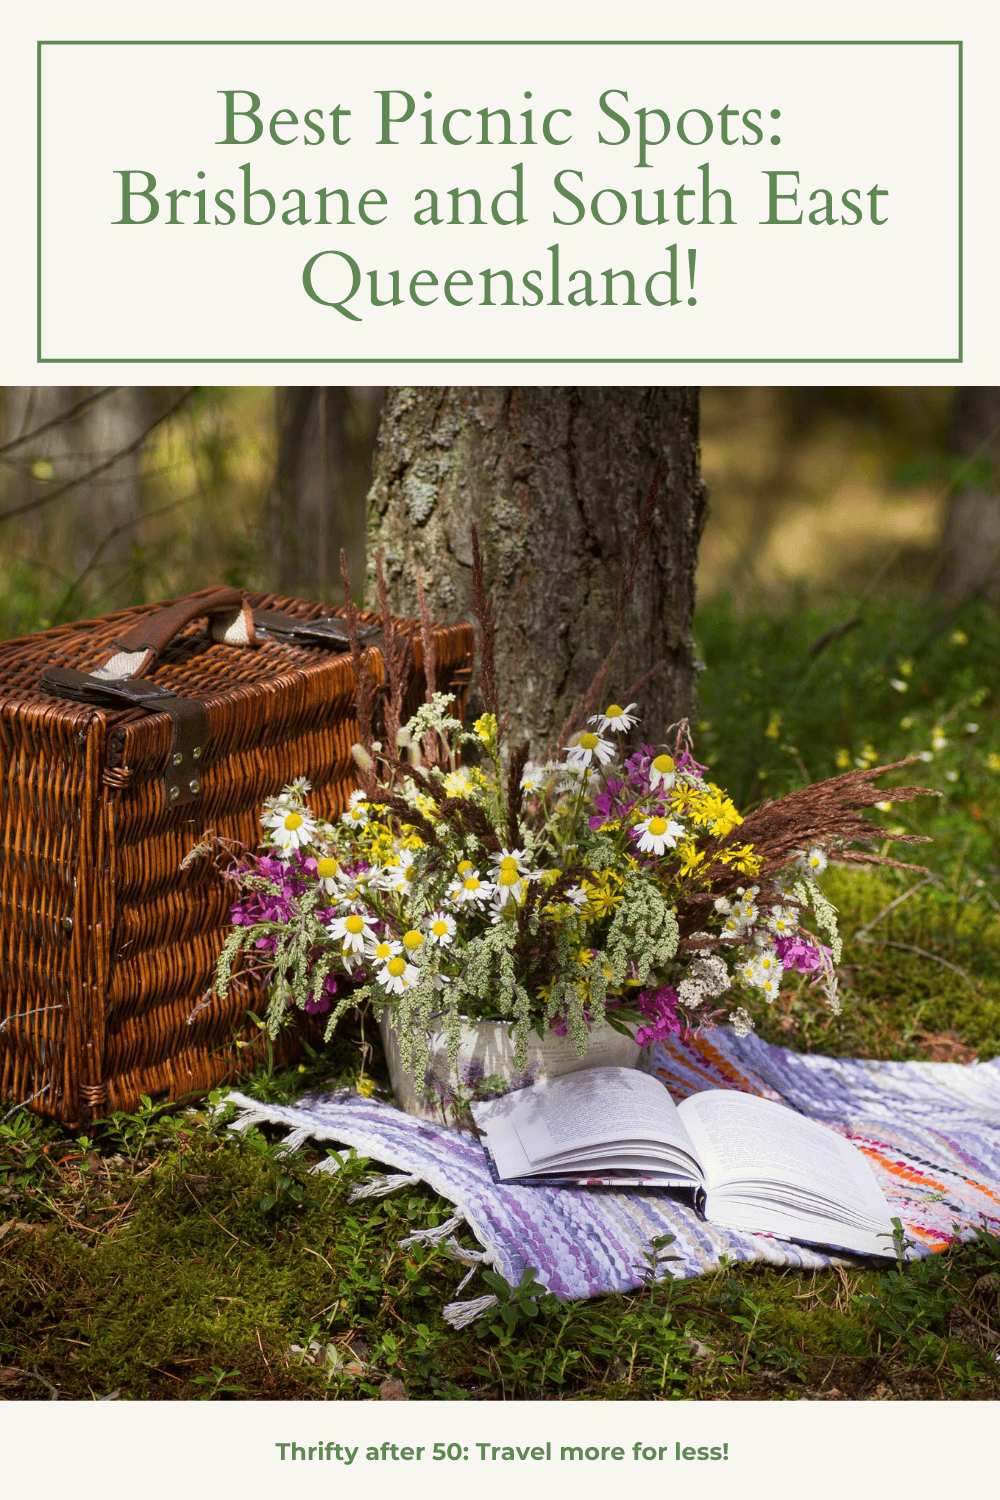 Best Picnic Spots Brisbane and South East Queensland